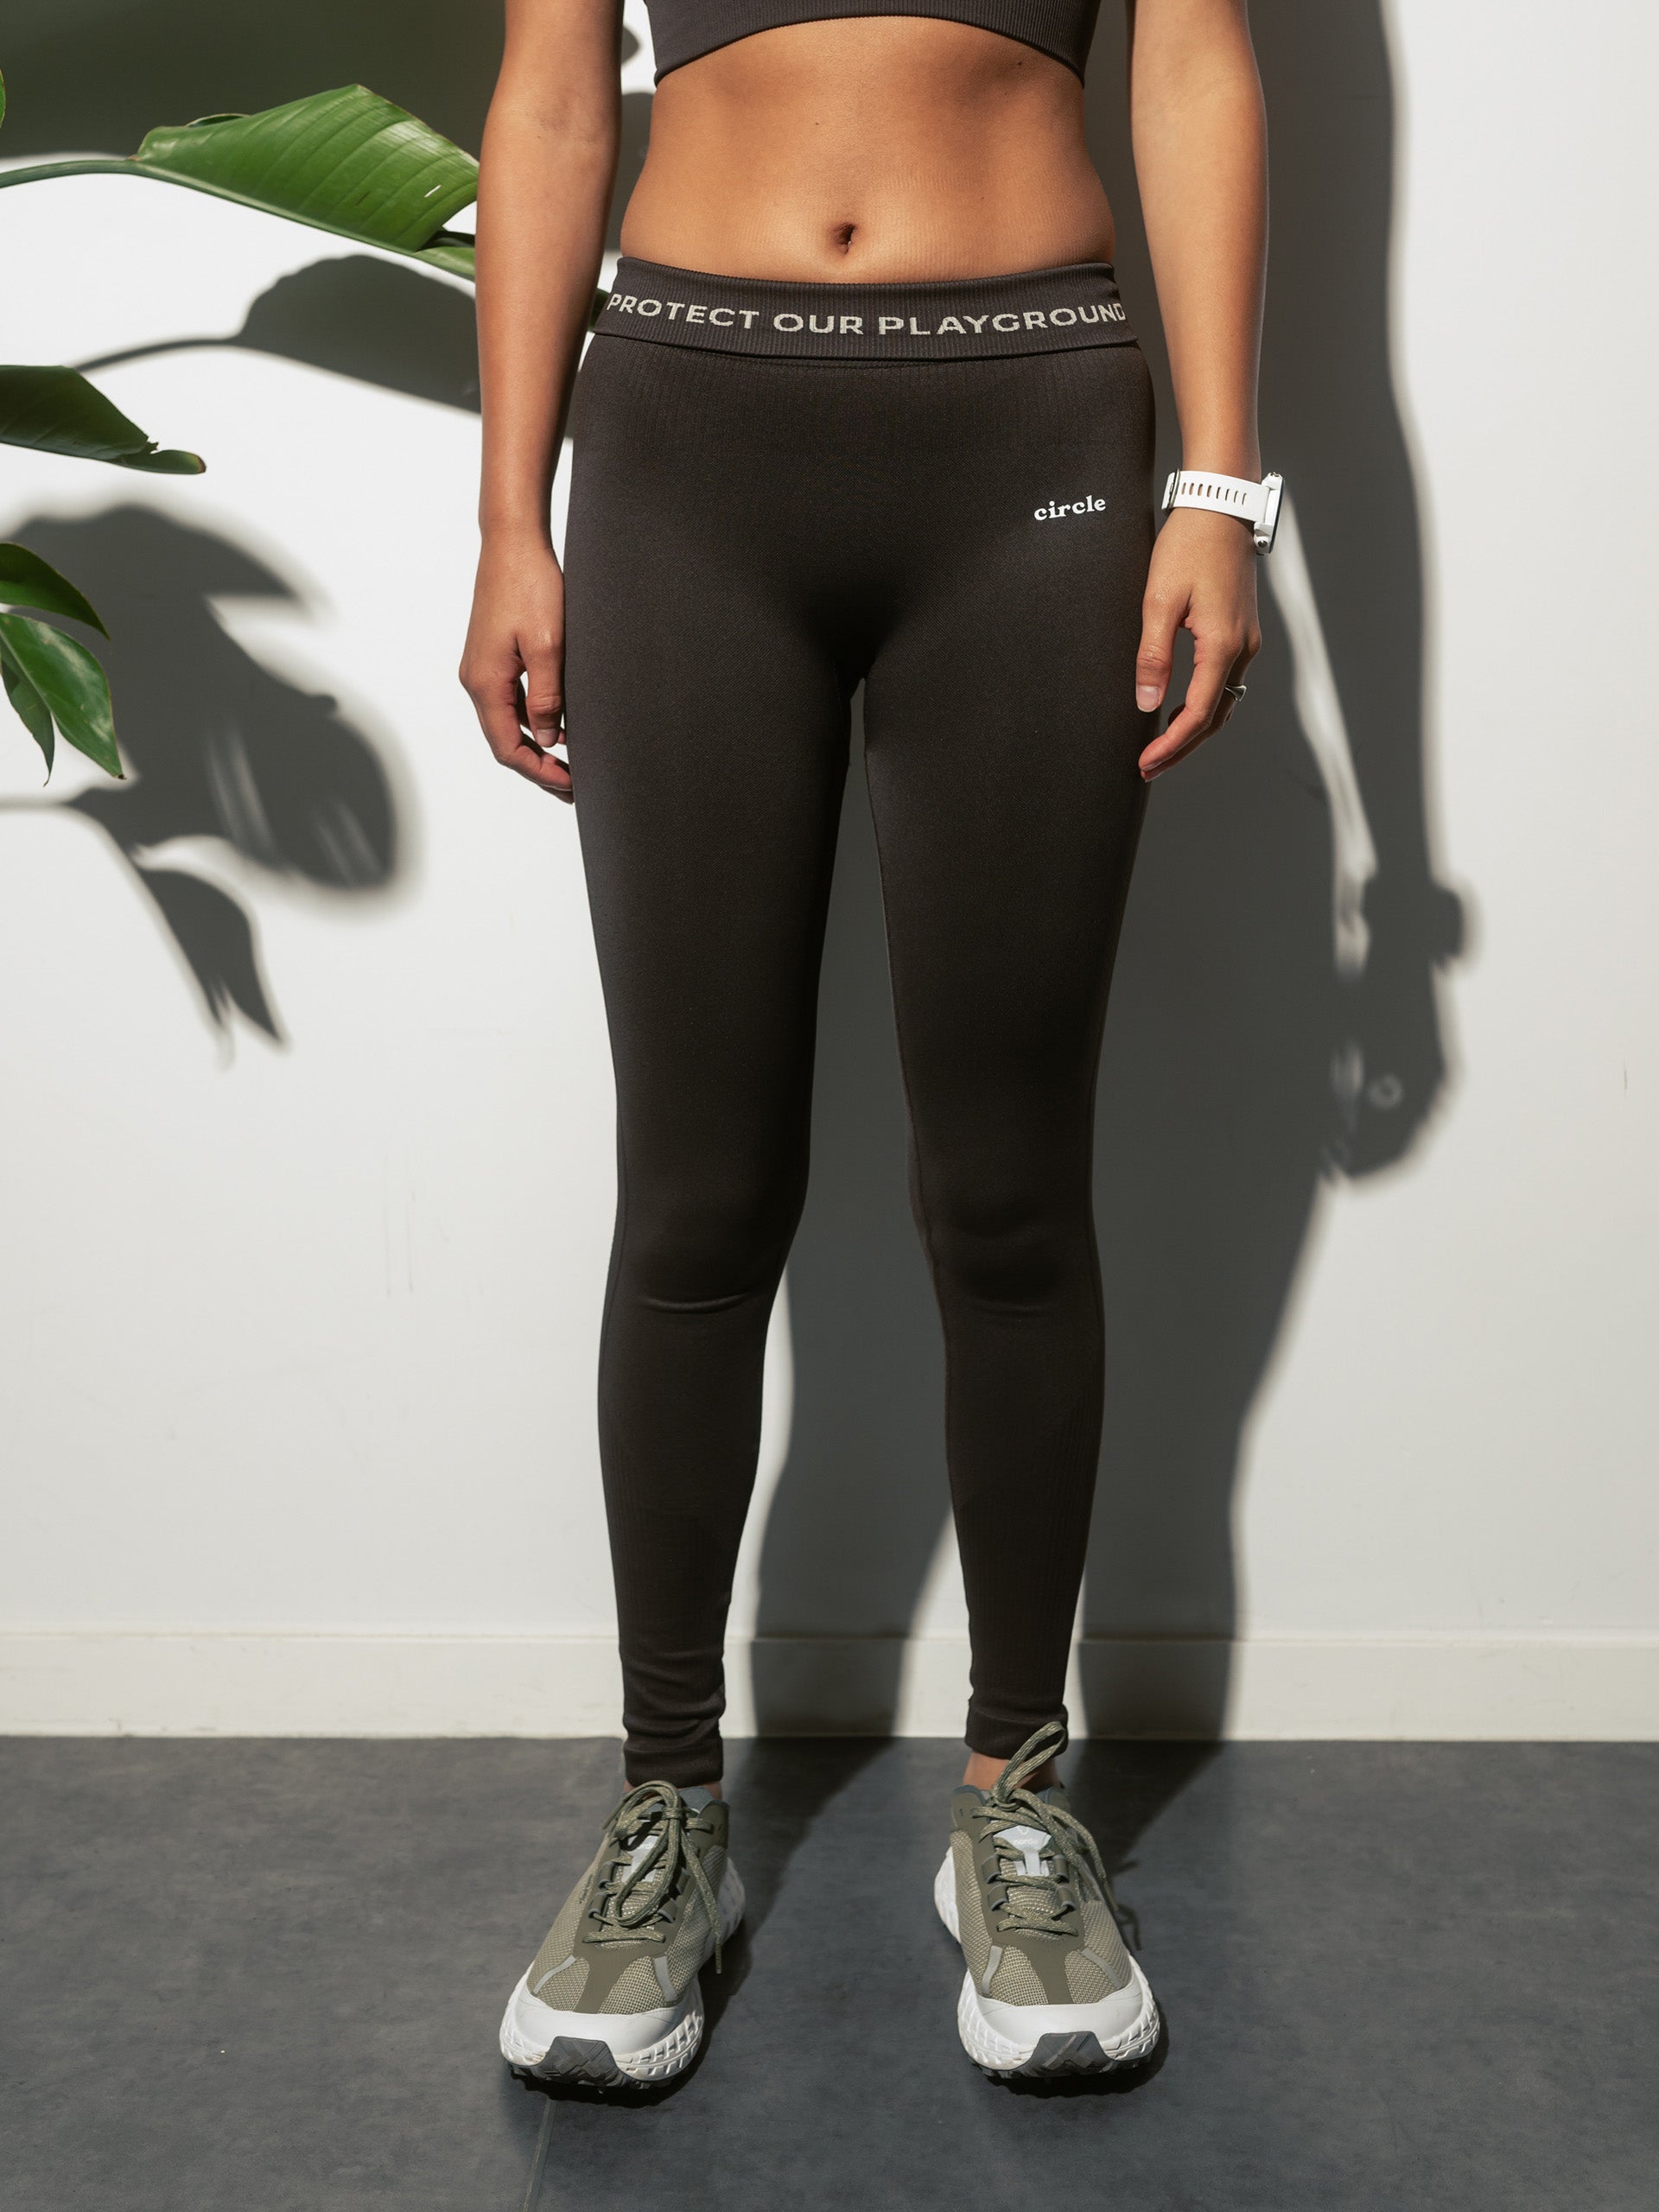 Seamless technology. Made from Q-NOVA recycled polyamide from Italy. Knitted stretch fabric, according to different areas of the body, with a technical mesh construction that maximizes performance. 	